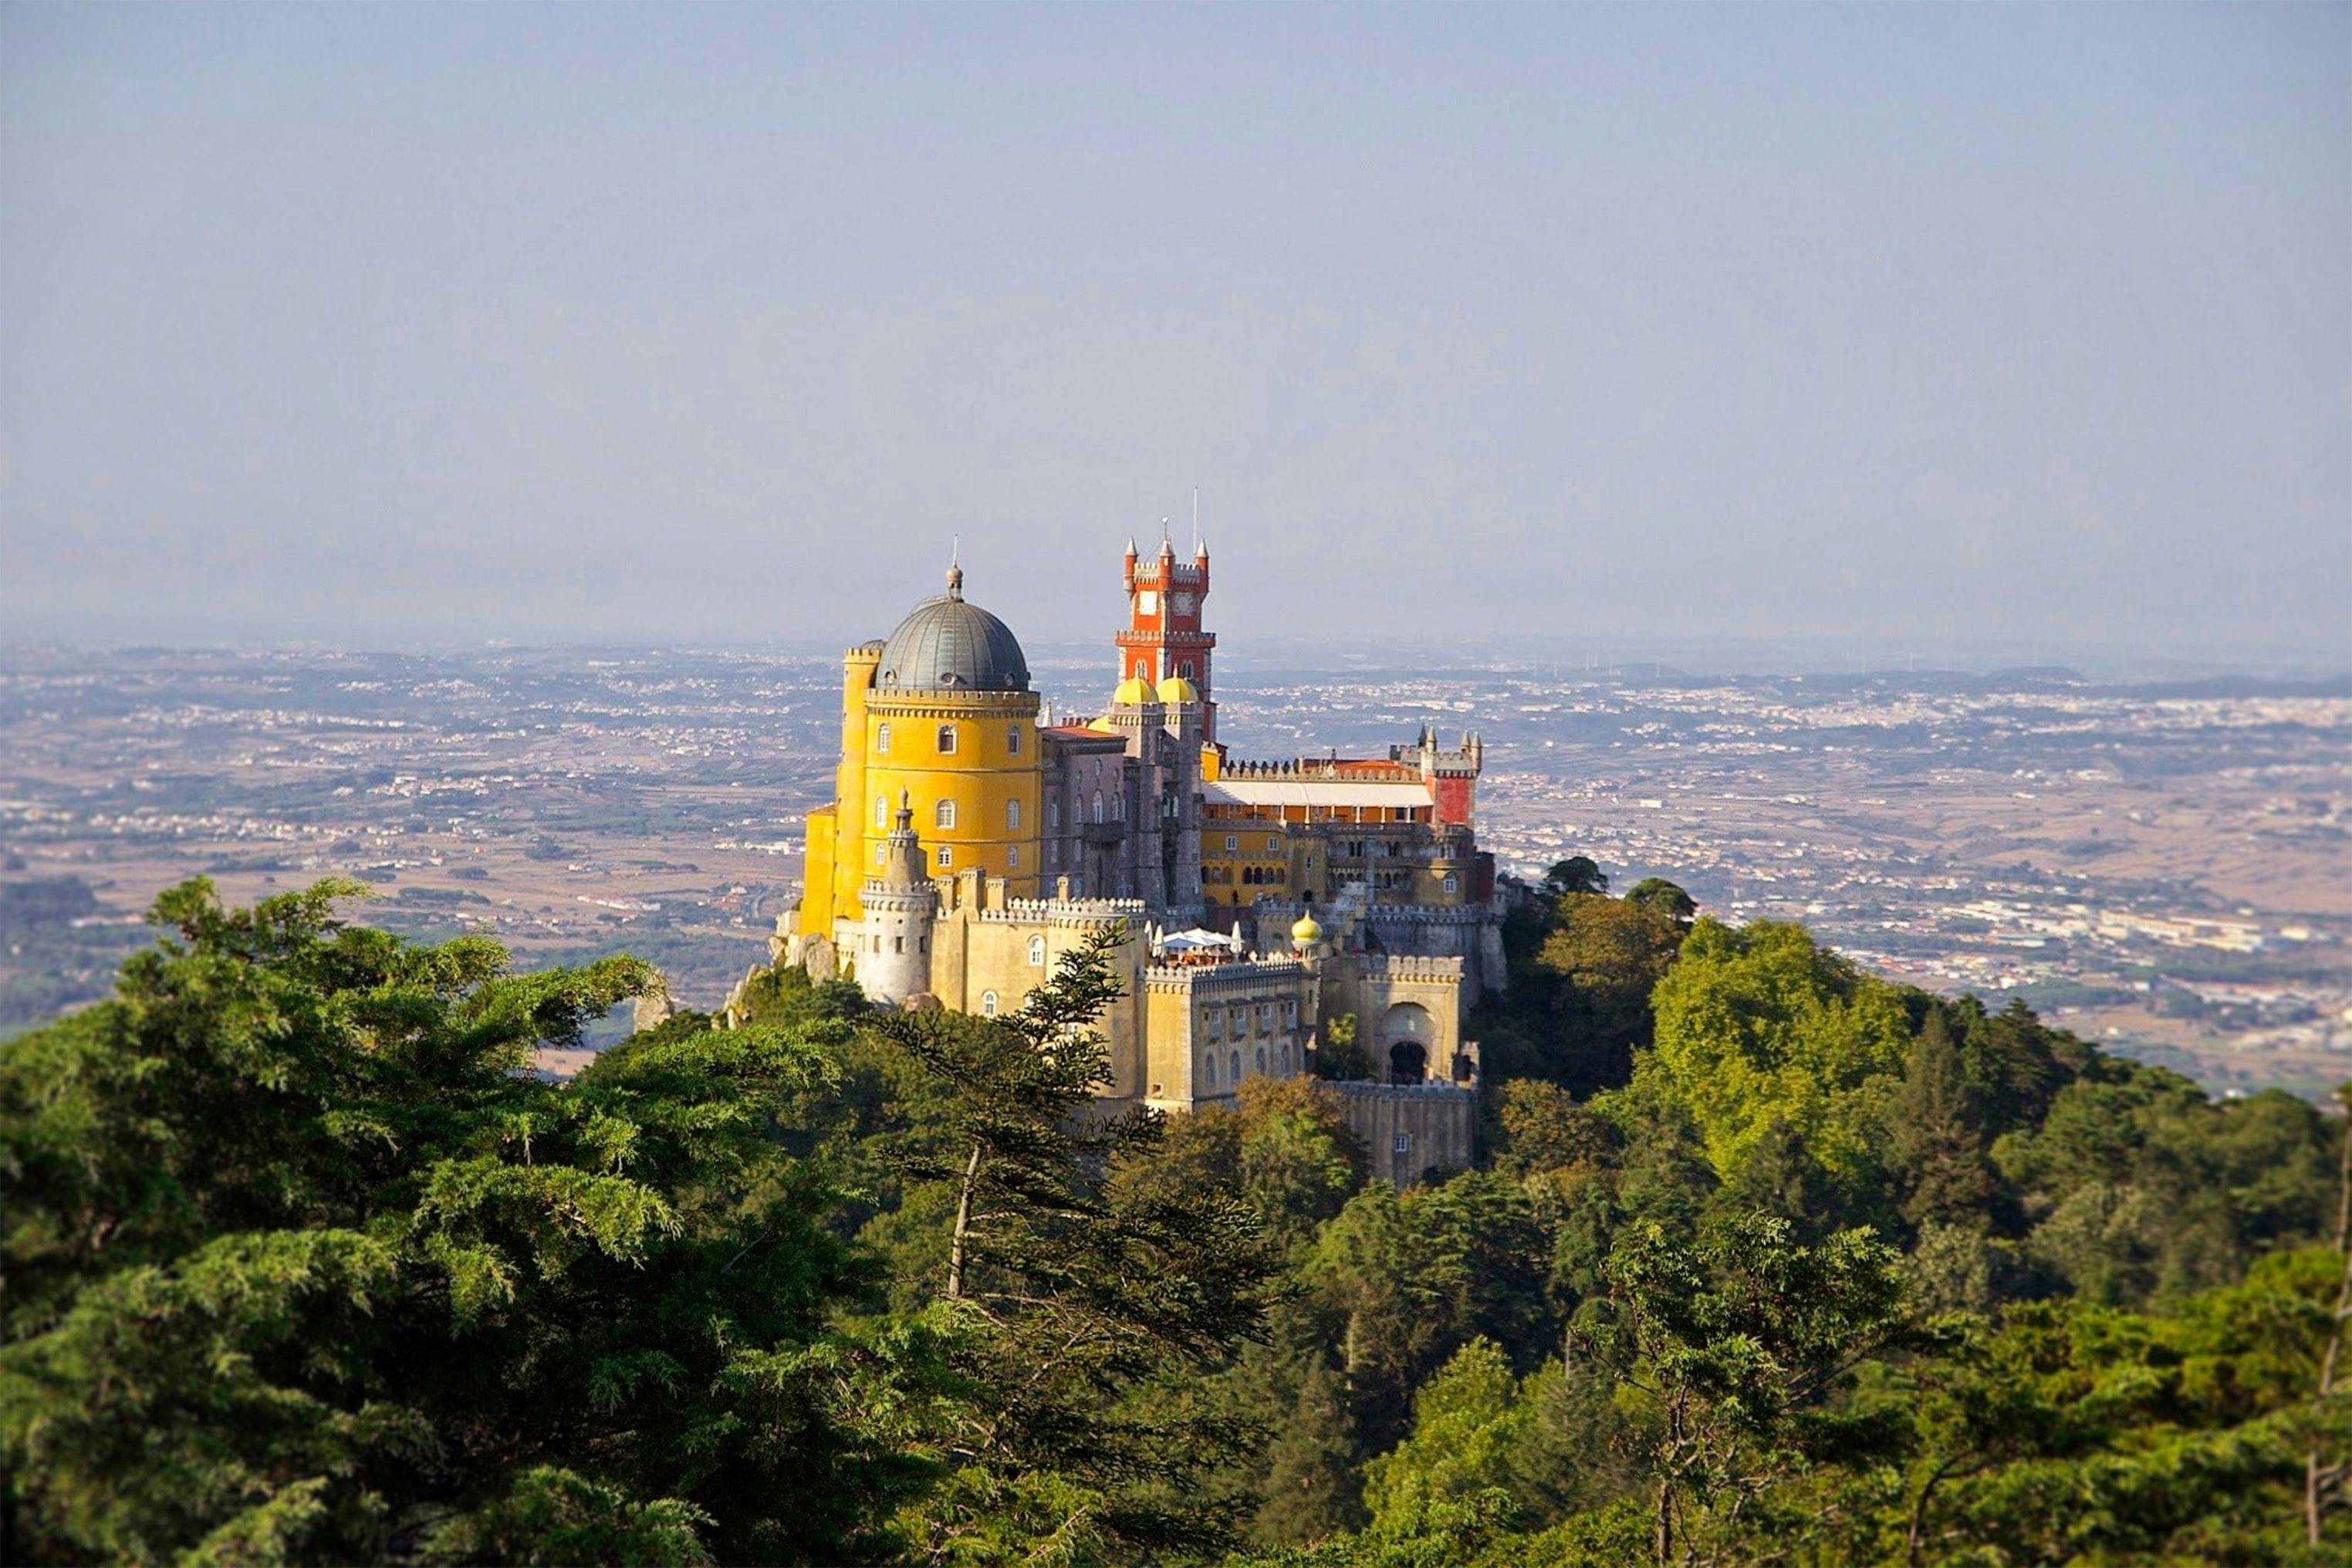 Palace of Pena in Sintra Portugal.